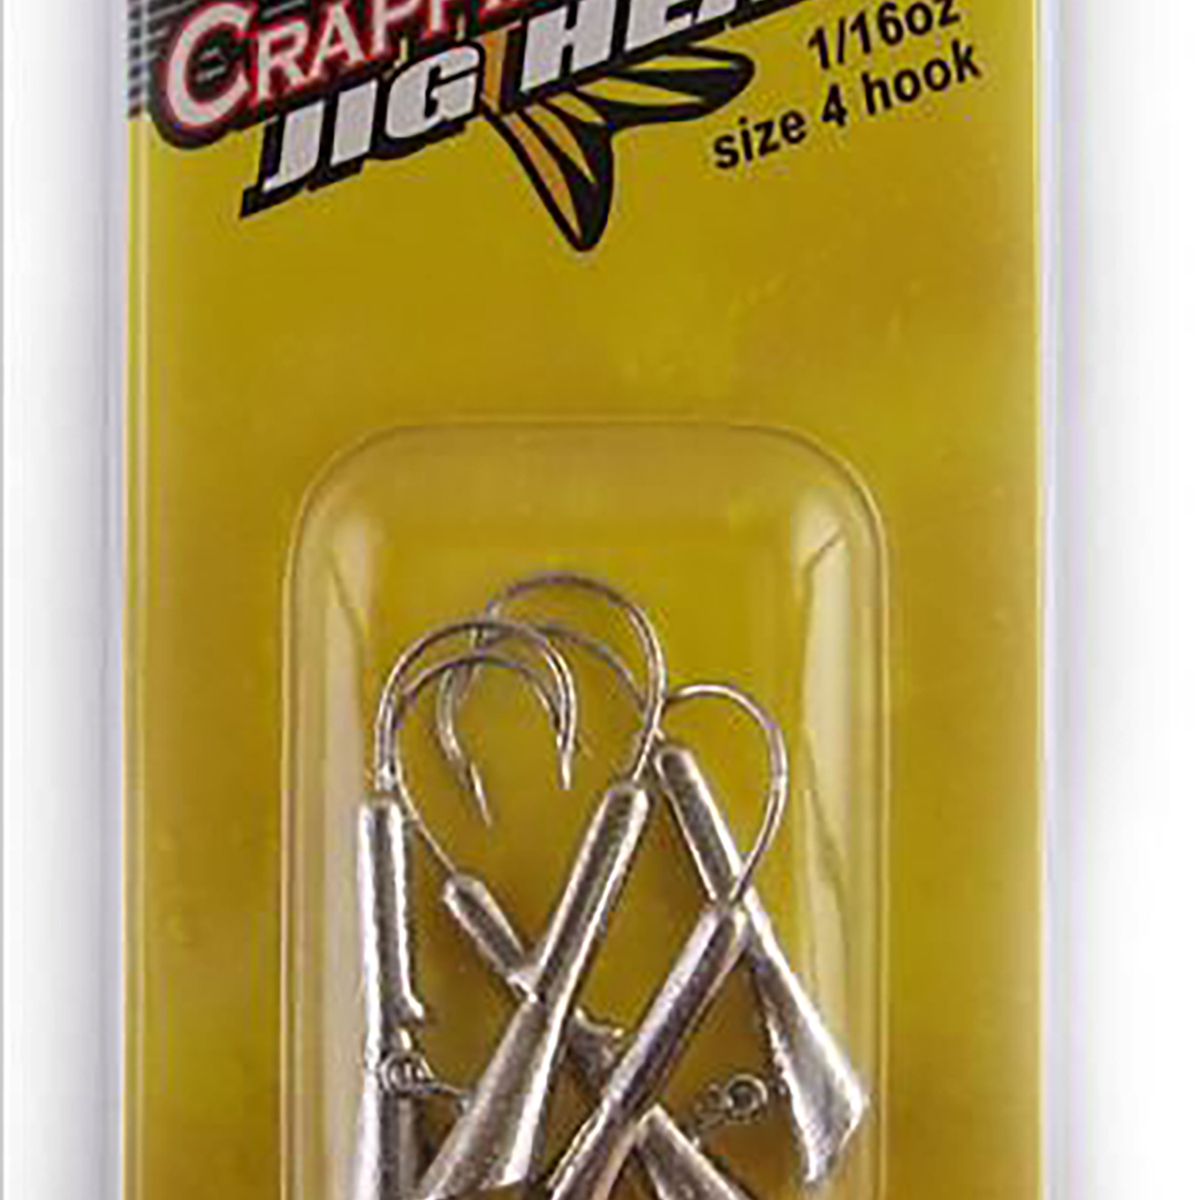 Leland's Crappie Magnet Replacement Jig Heads, Nickel